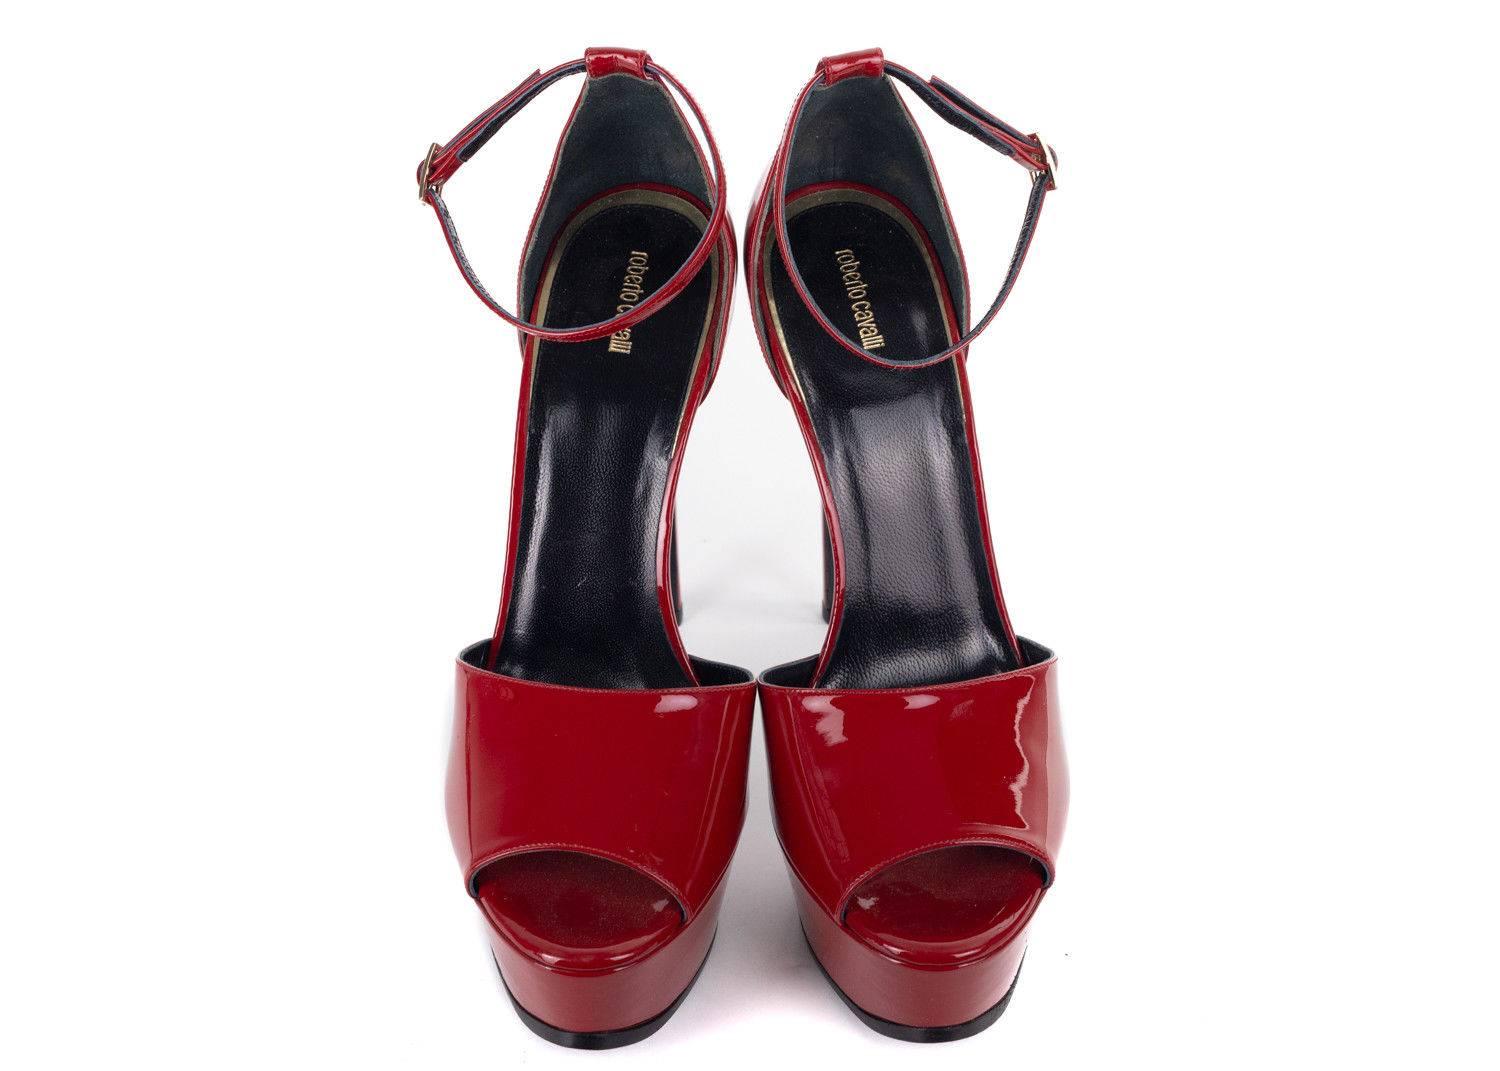 Roberto Cavalli Womens Red Patent High Heels Sandals Pumps In New Condition For Sale In Brooklyn, NY